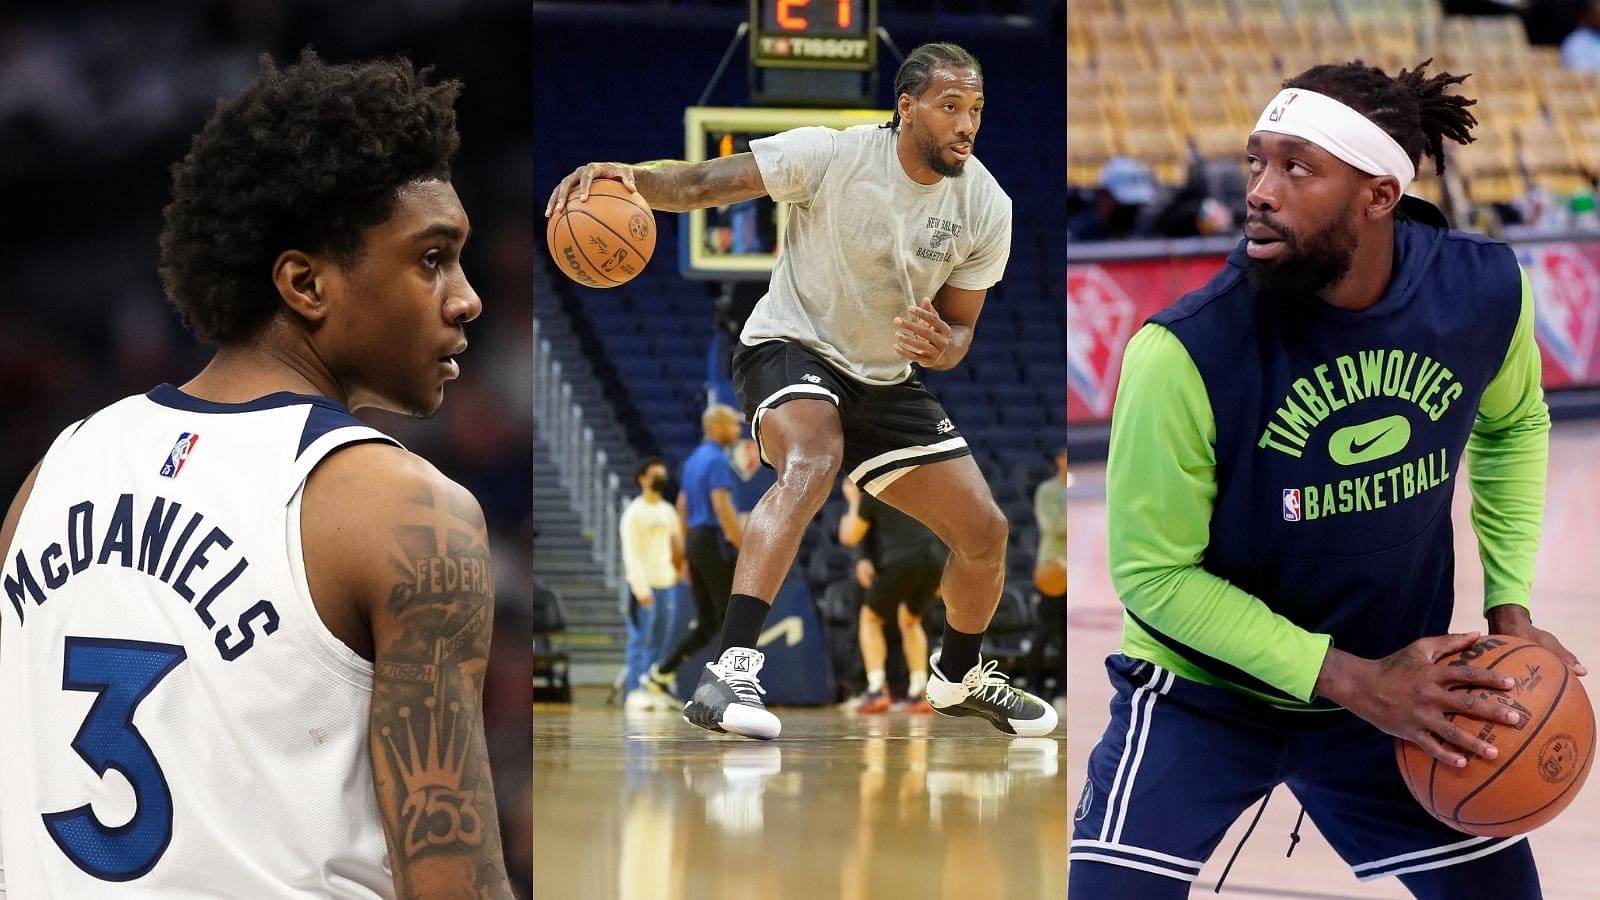 "Patrick Beverley plans to have Jaden McDaniels working out with Kawhi Leonard": Timberwolves guard has already planned up summer workout with former Clippers teammate